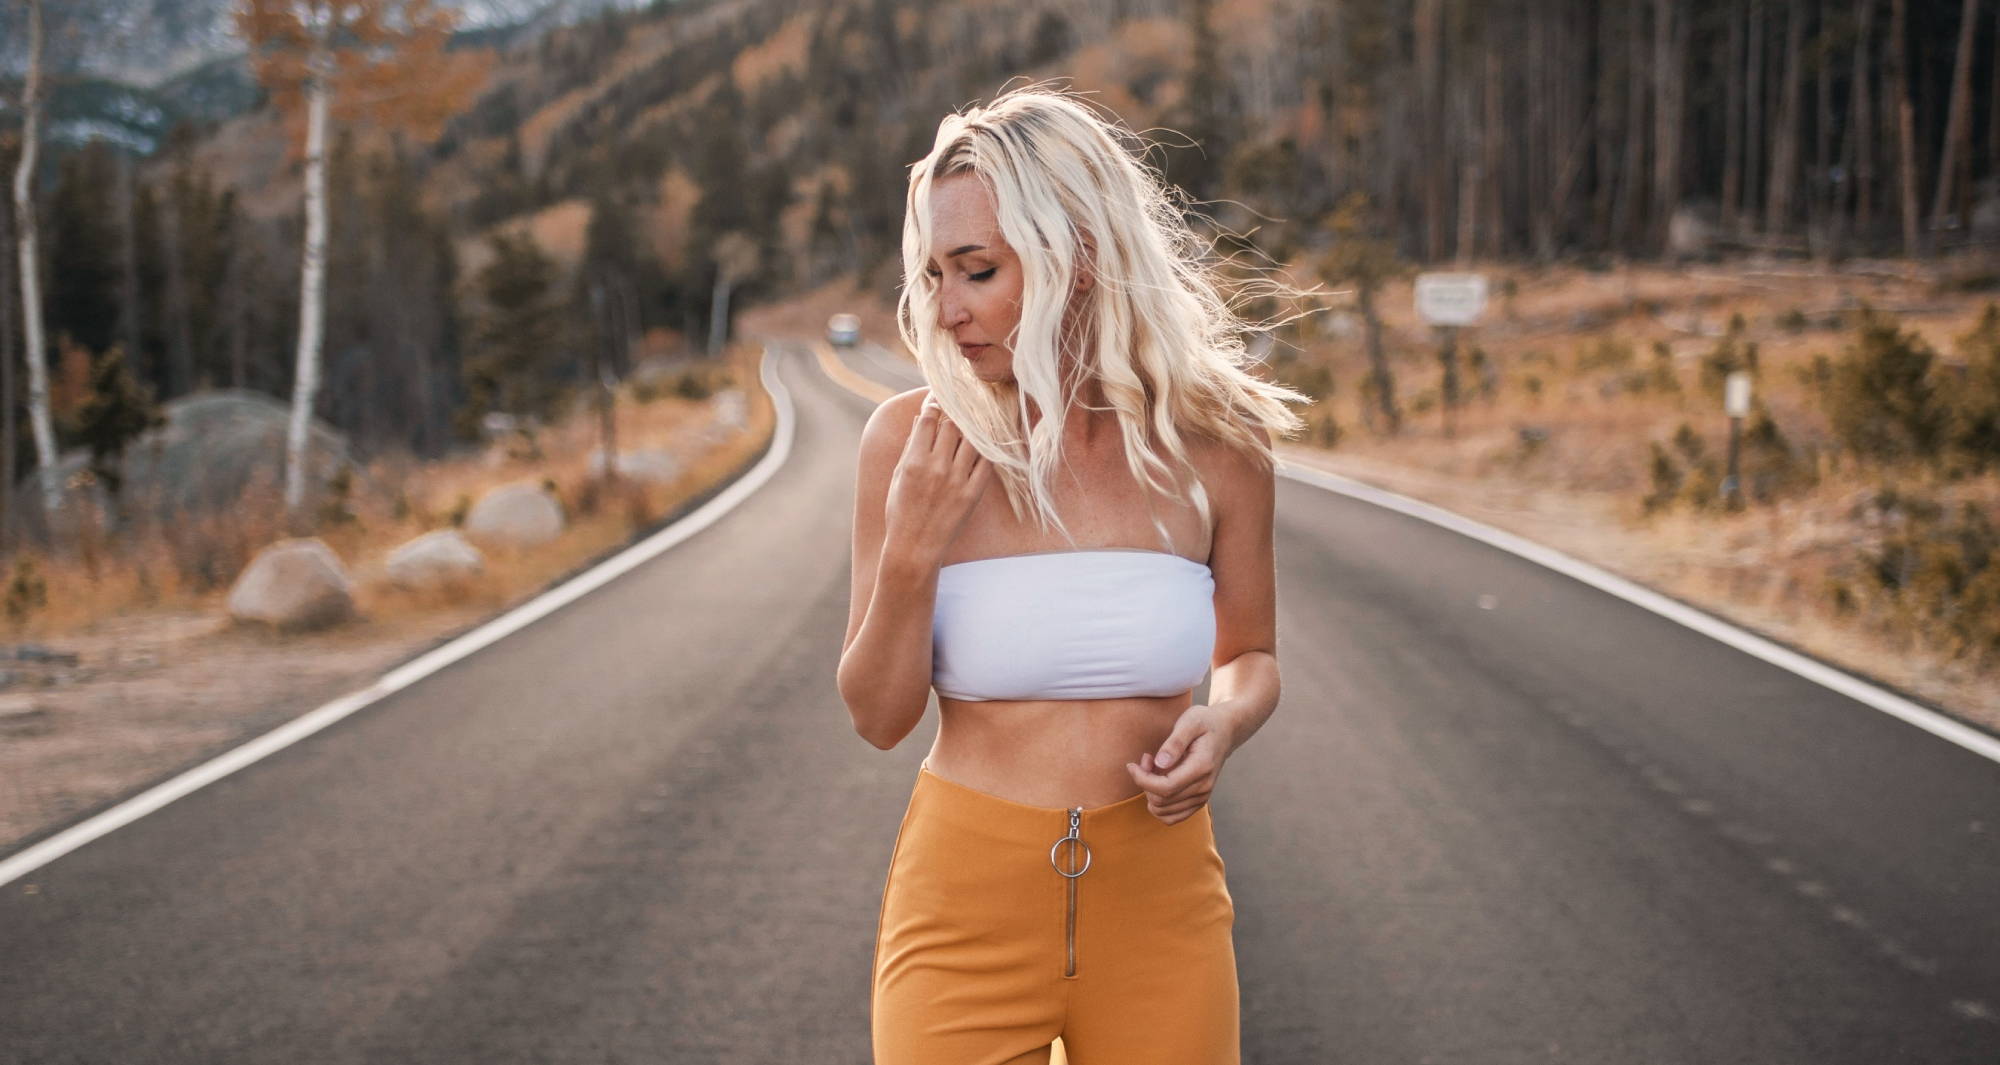  A woman with blond hair wearing orange pants and a white strapless top walks along a paved road in the mountains.